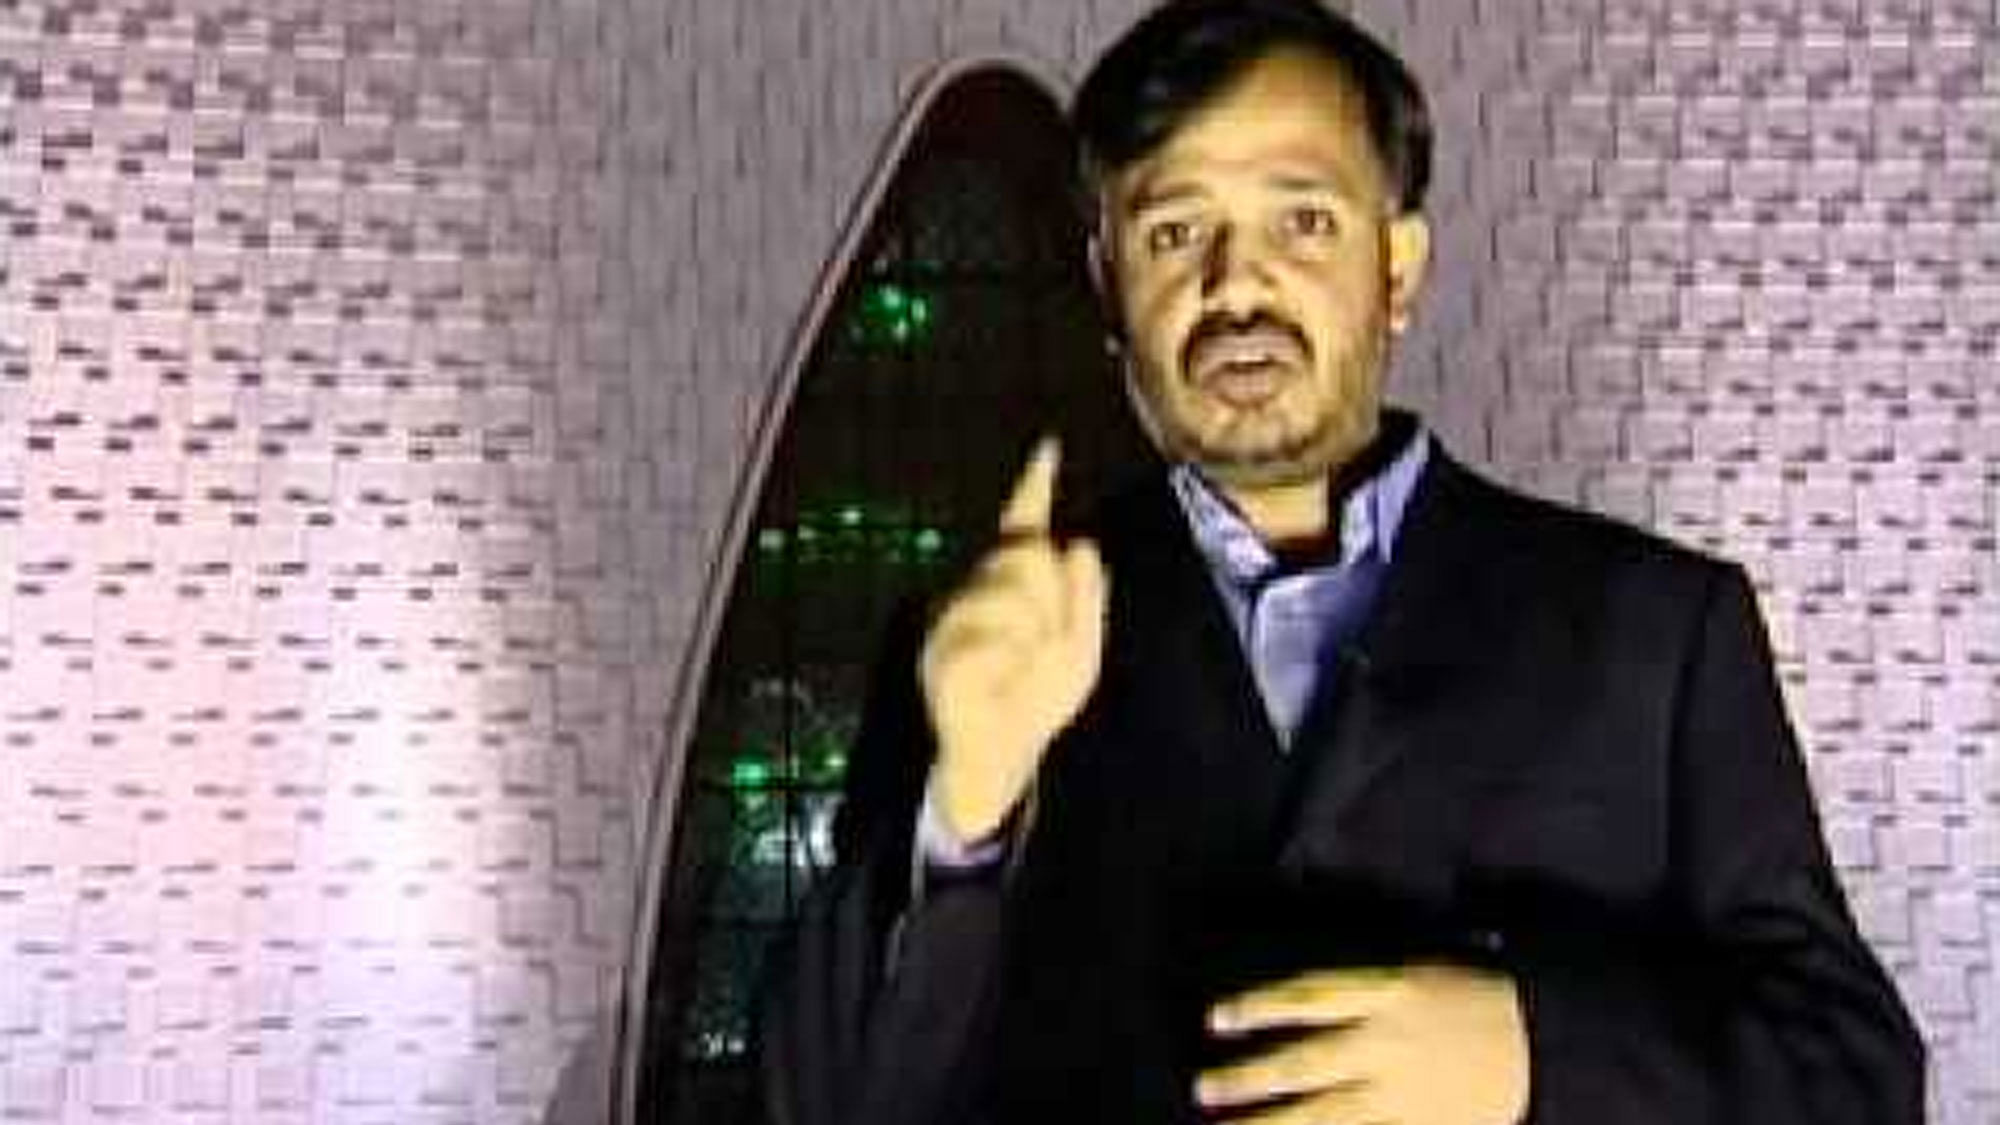 Khurram Zaki was known for his strong stance against religious extremism in Pakistan. (Photo Courtesy: <a href="https://www.youtube.com/watch?v=qIq_NxmCovA">YouTube screenshot</a>)